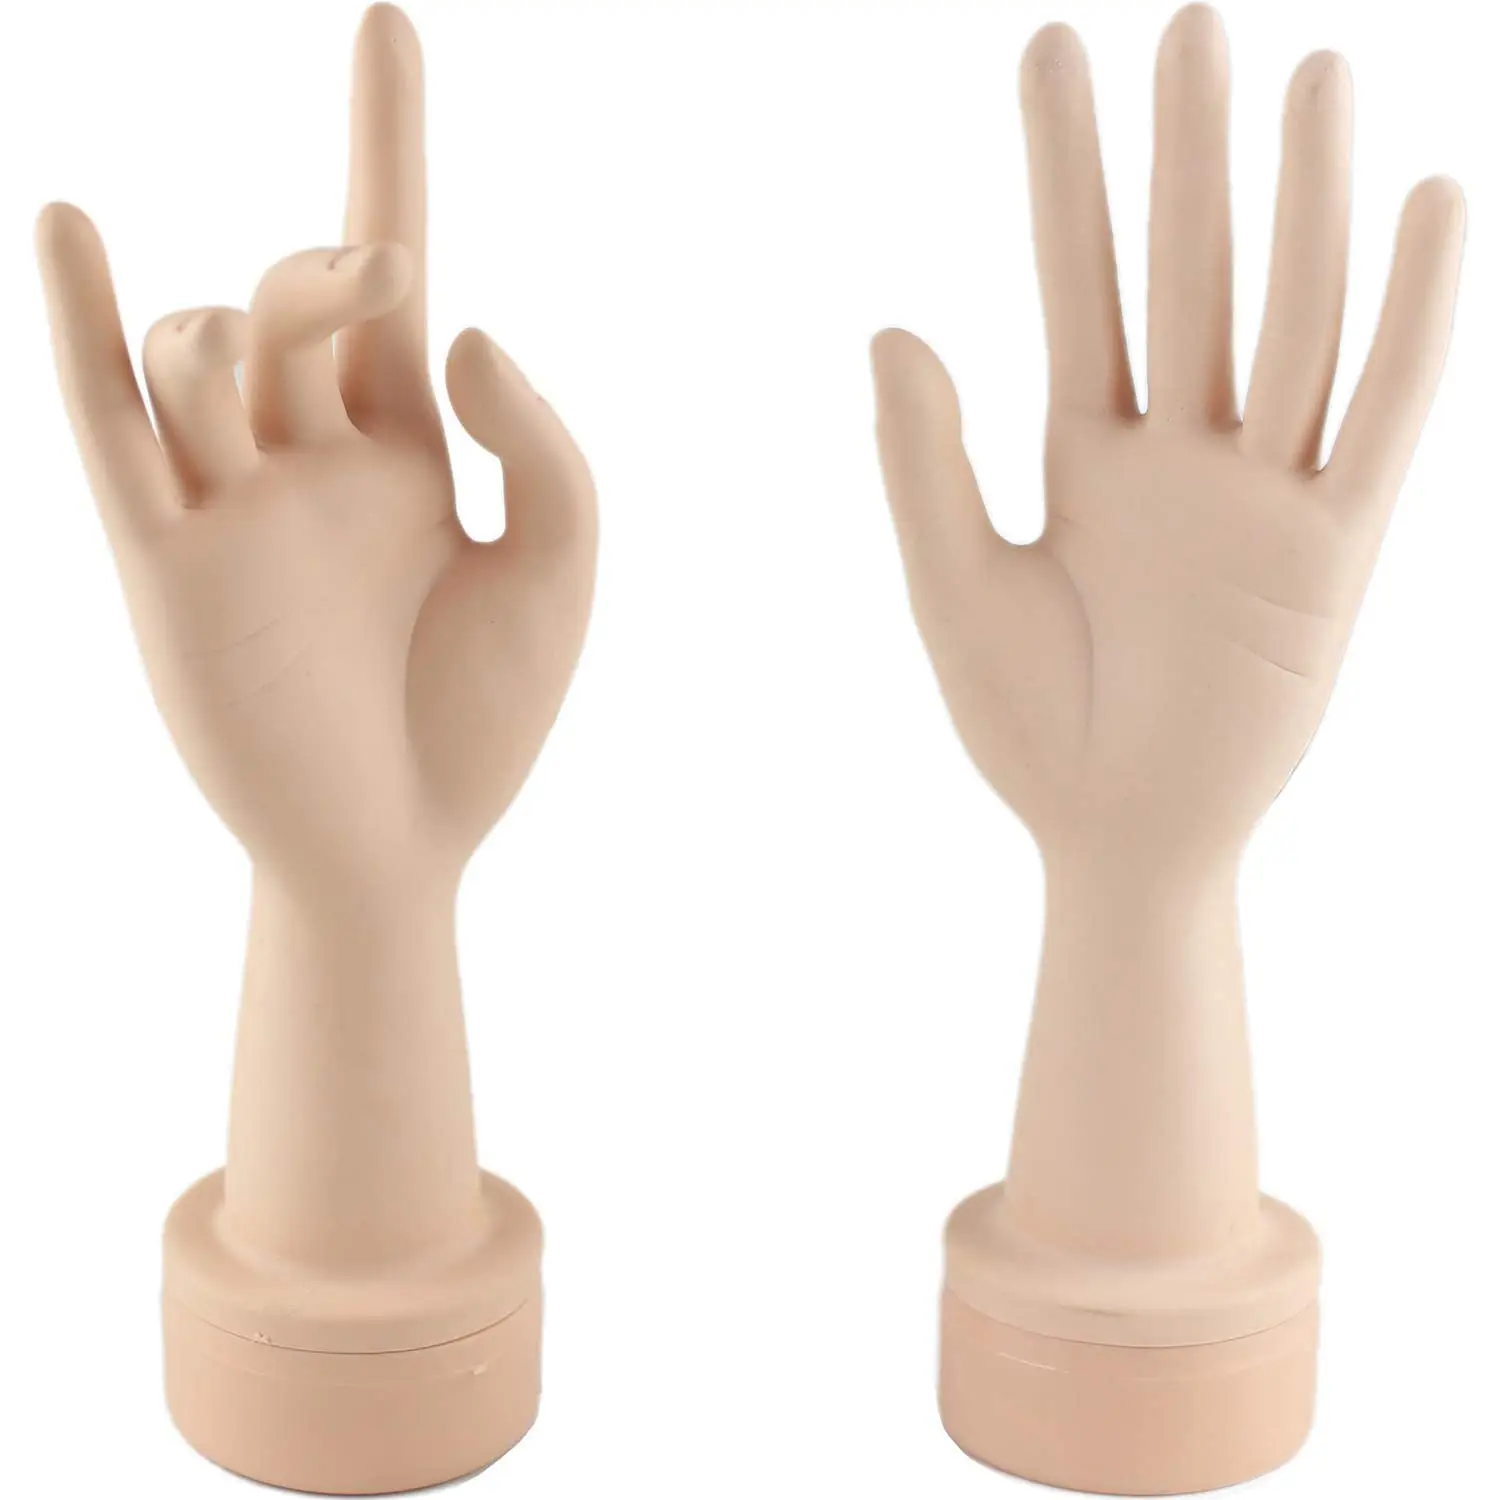 Practice Flexible Mannequin Hand Nail Display with Soft Fingers and Practice Manicure Nails Hand by Fake Hand